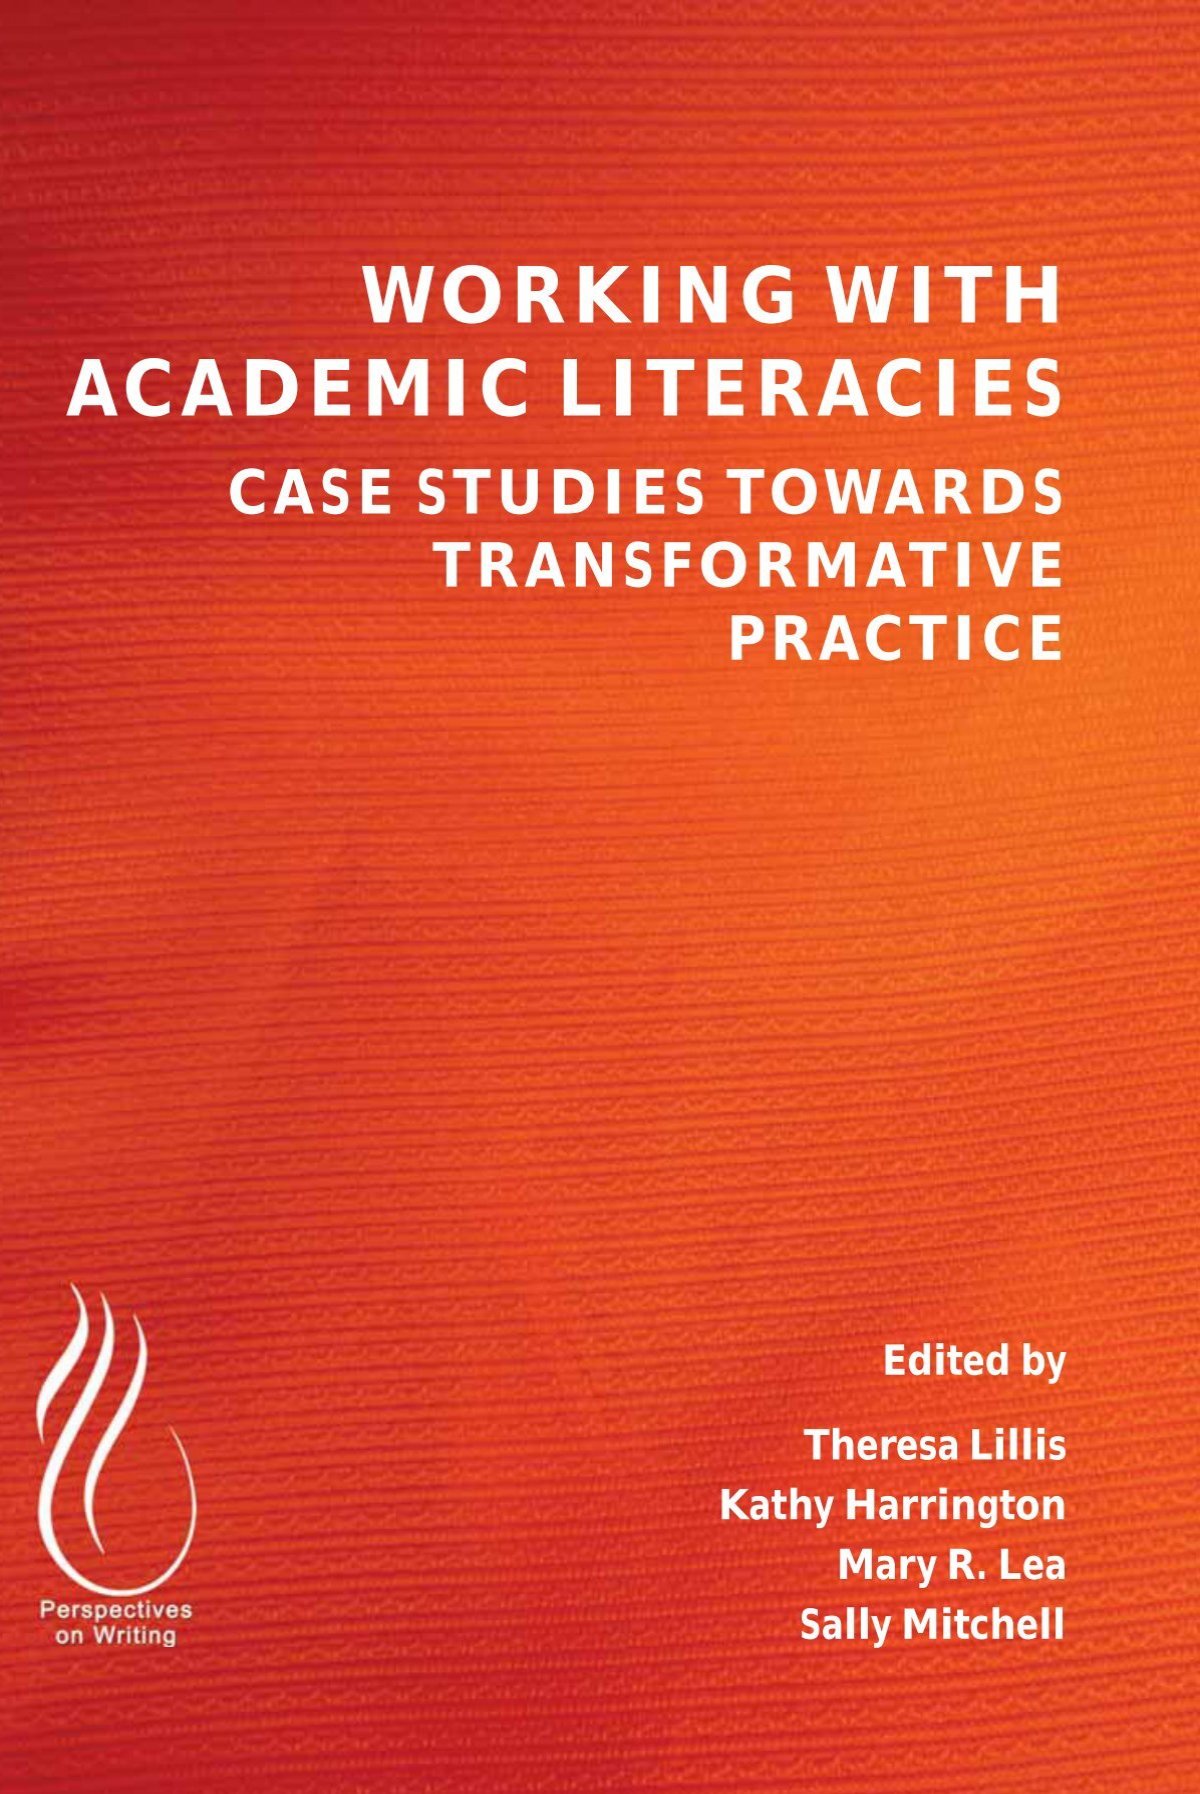 Working With Academic Literacies - Case Studies Towards Transformative  Practice, 2015a